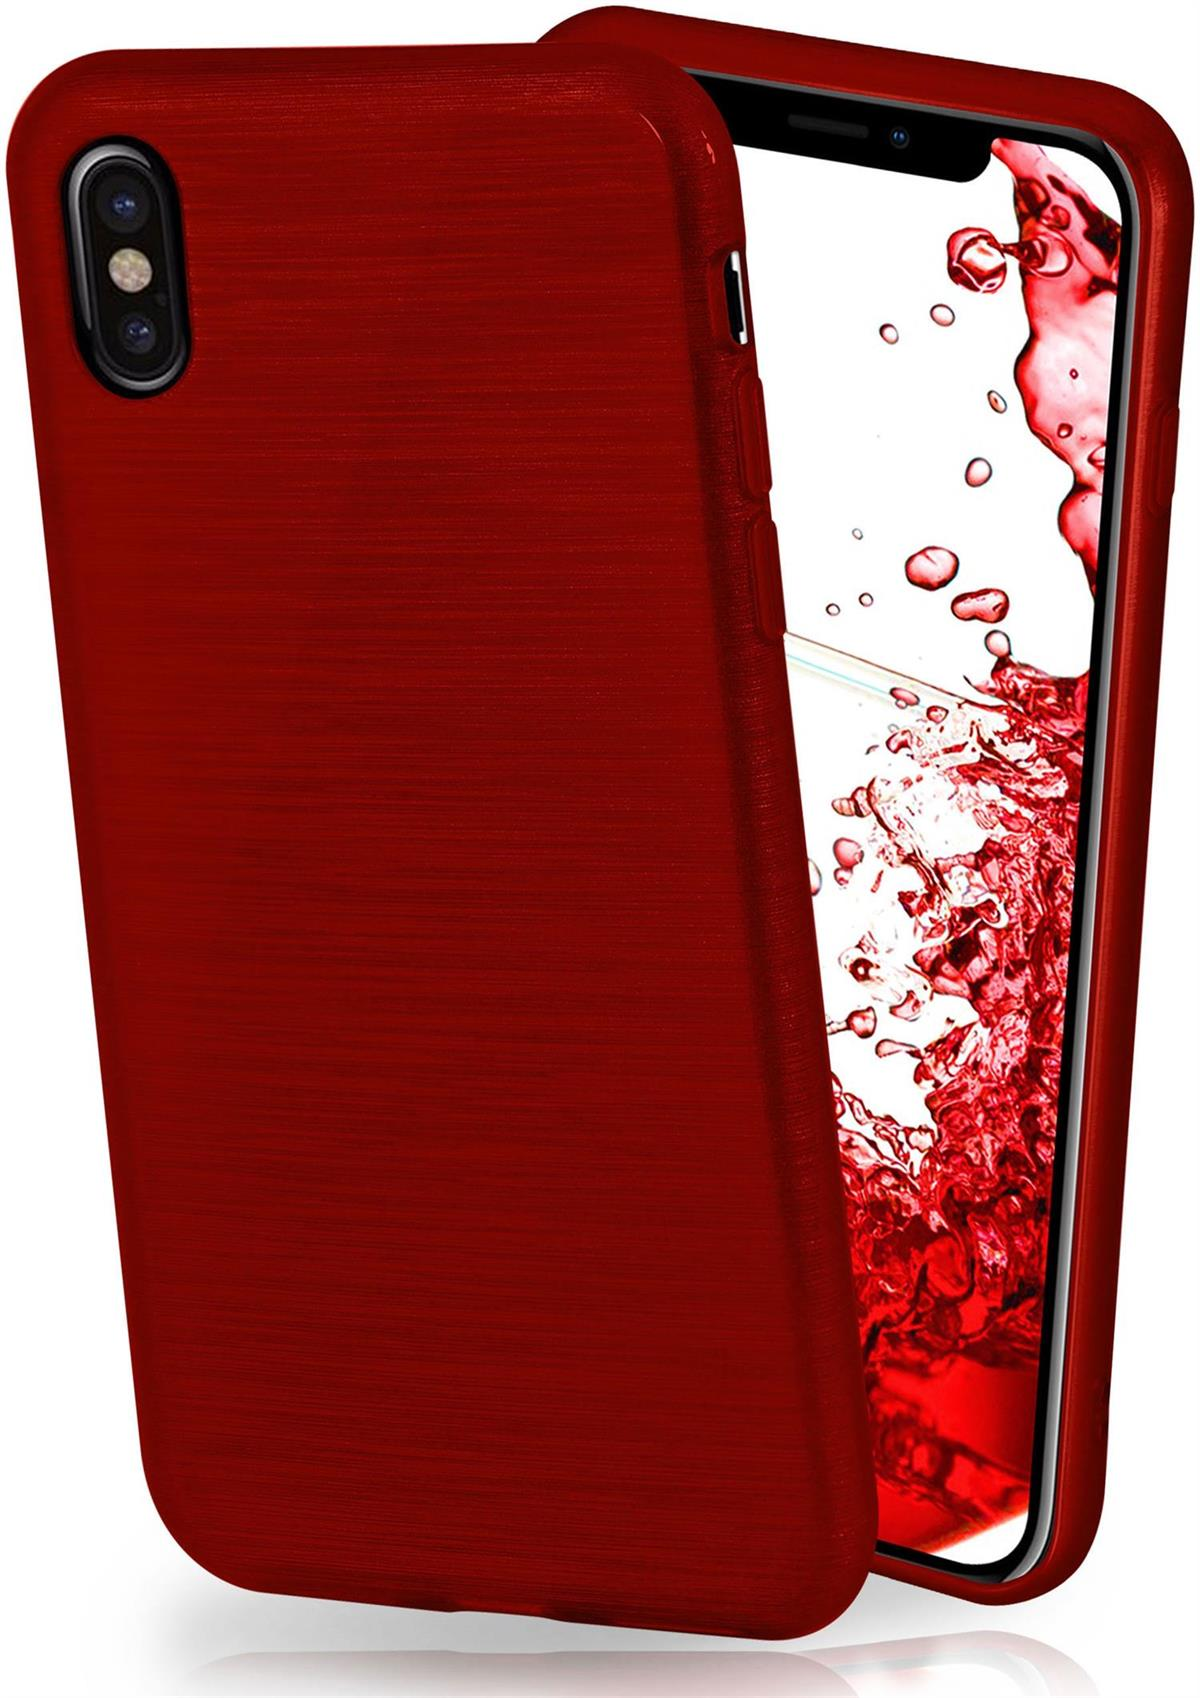 Case, Backcover, XS, iPhone Brushed MOEX Crimson-Red Apple,